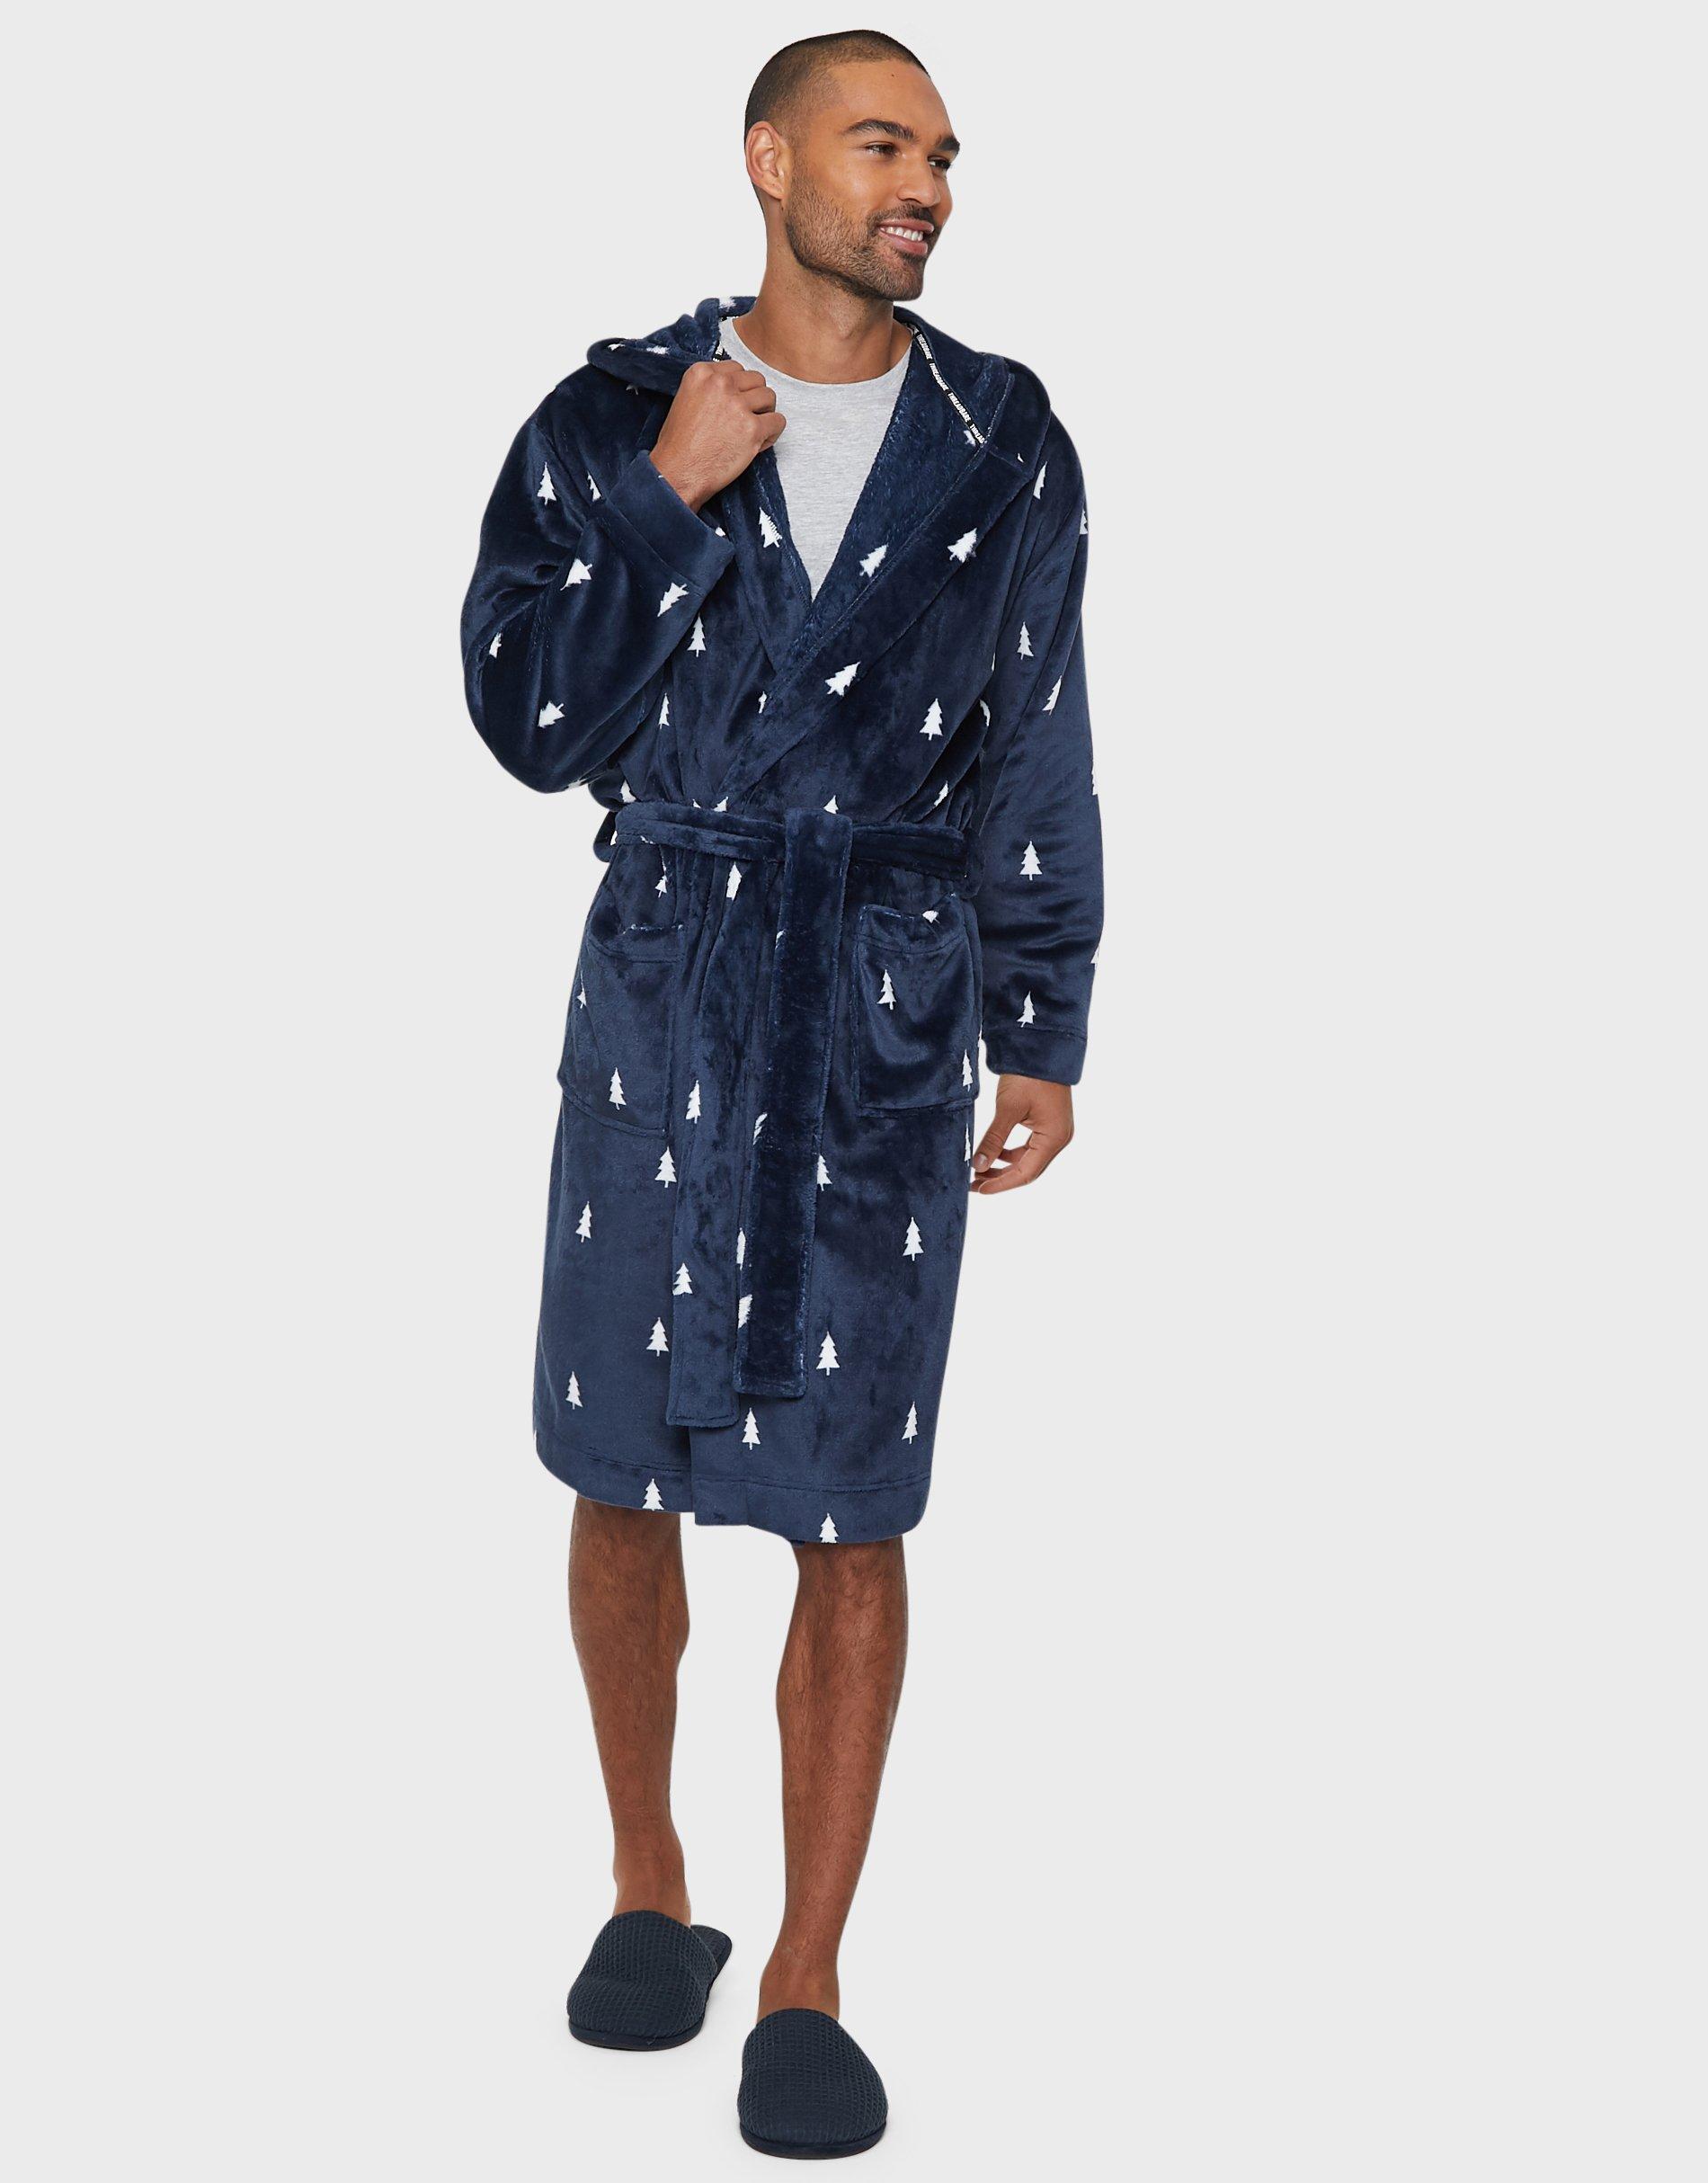 Maxfort extra large men's robe with belt and hood 100% soft cotton | Taglie  Forti Uomo